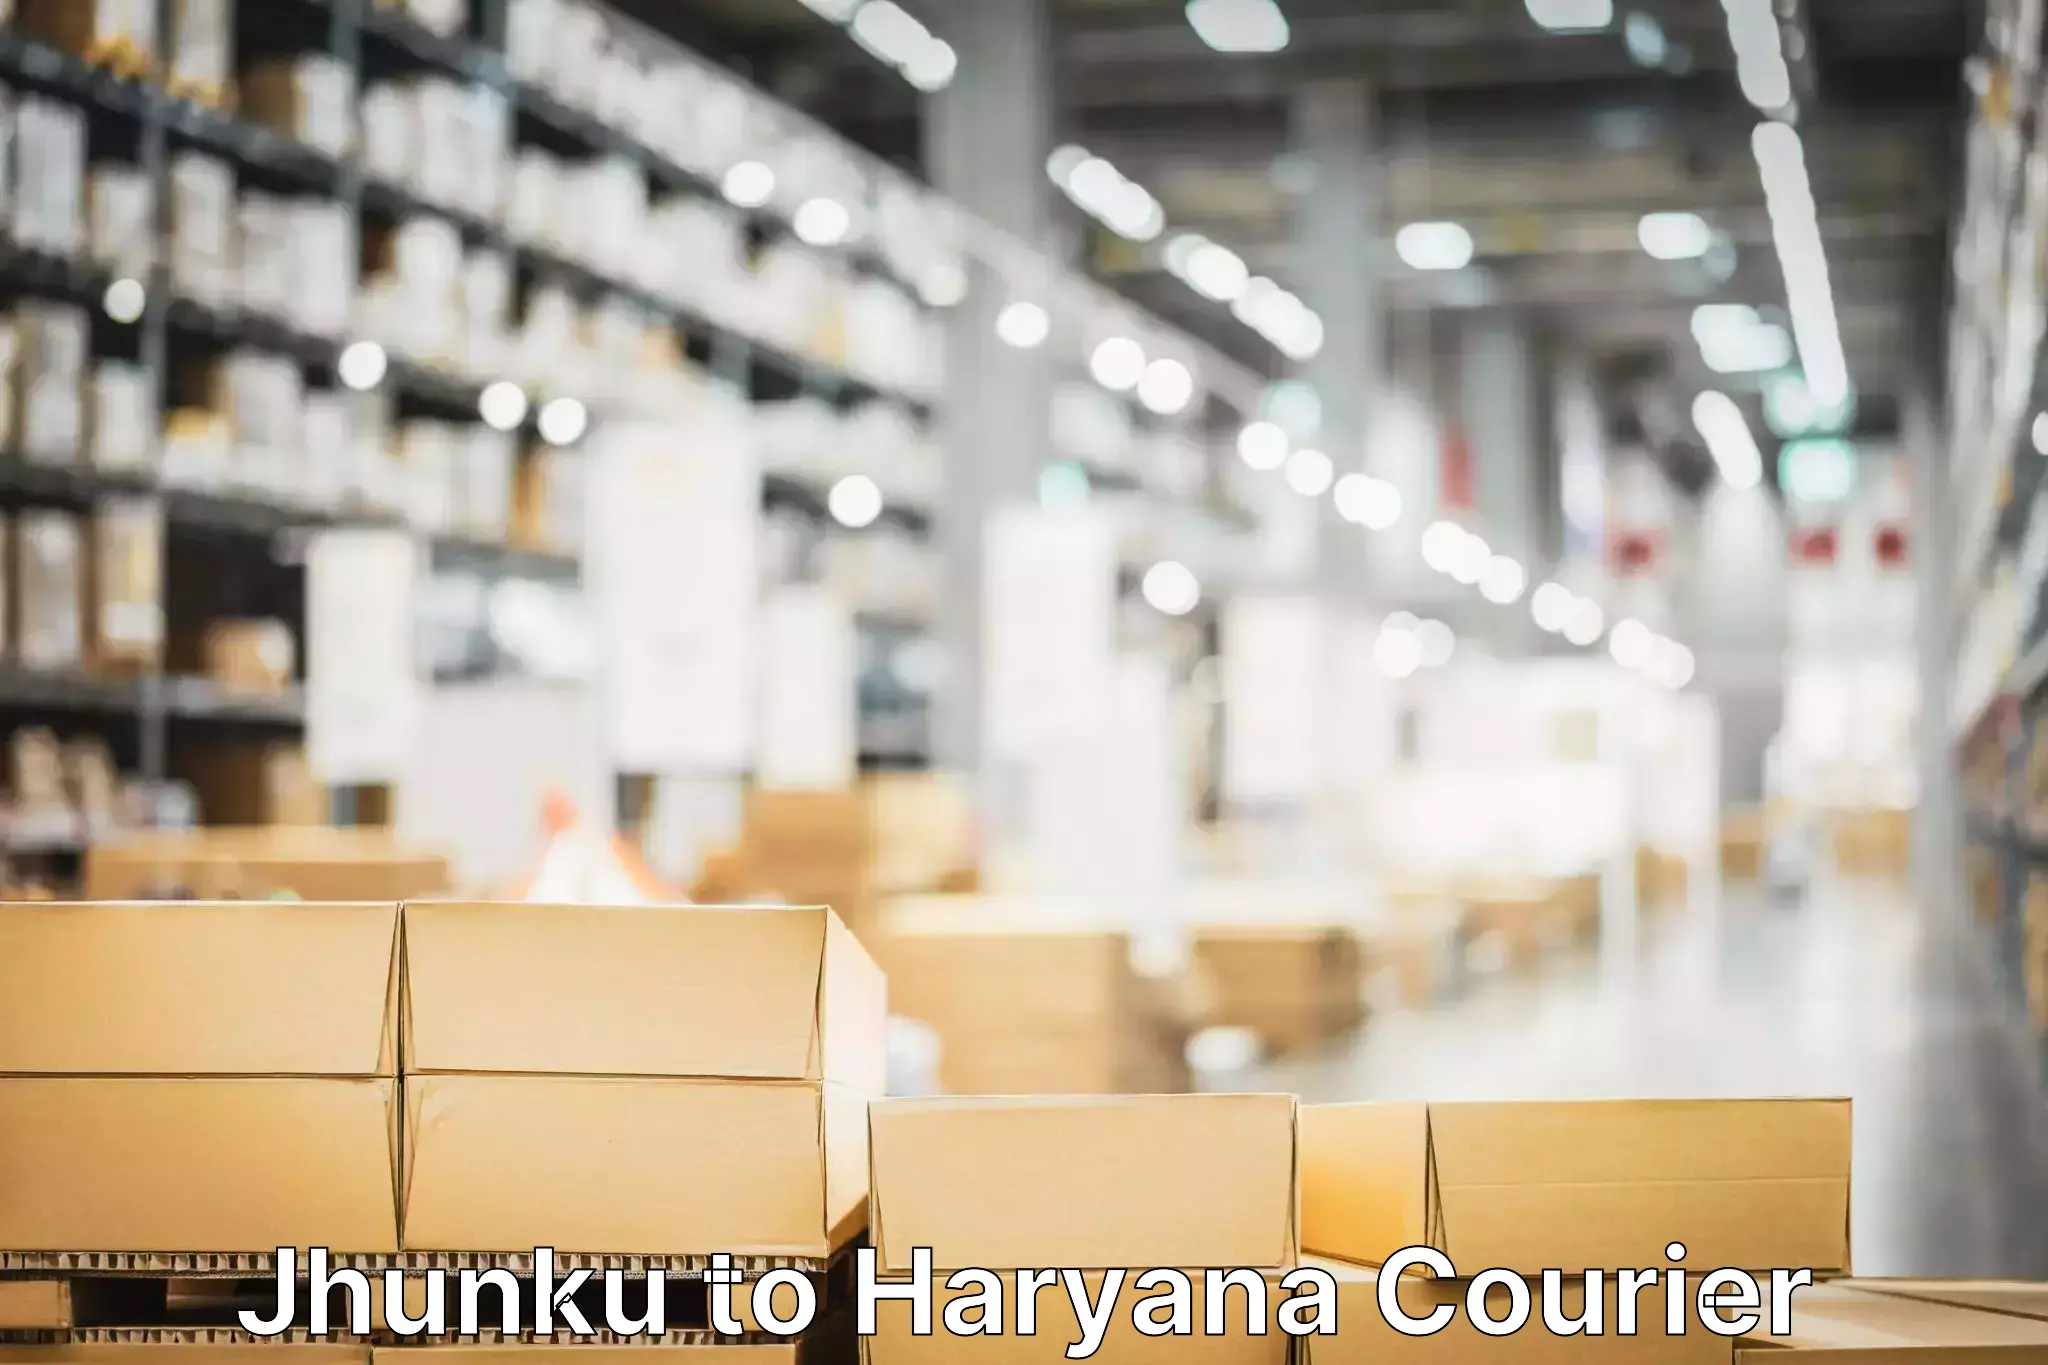 Reliable delivery network Jhunku to Haryana